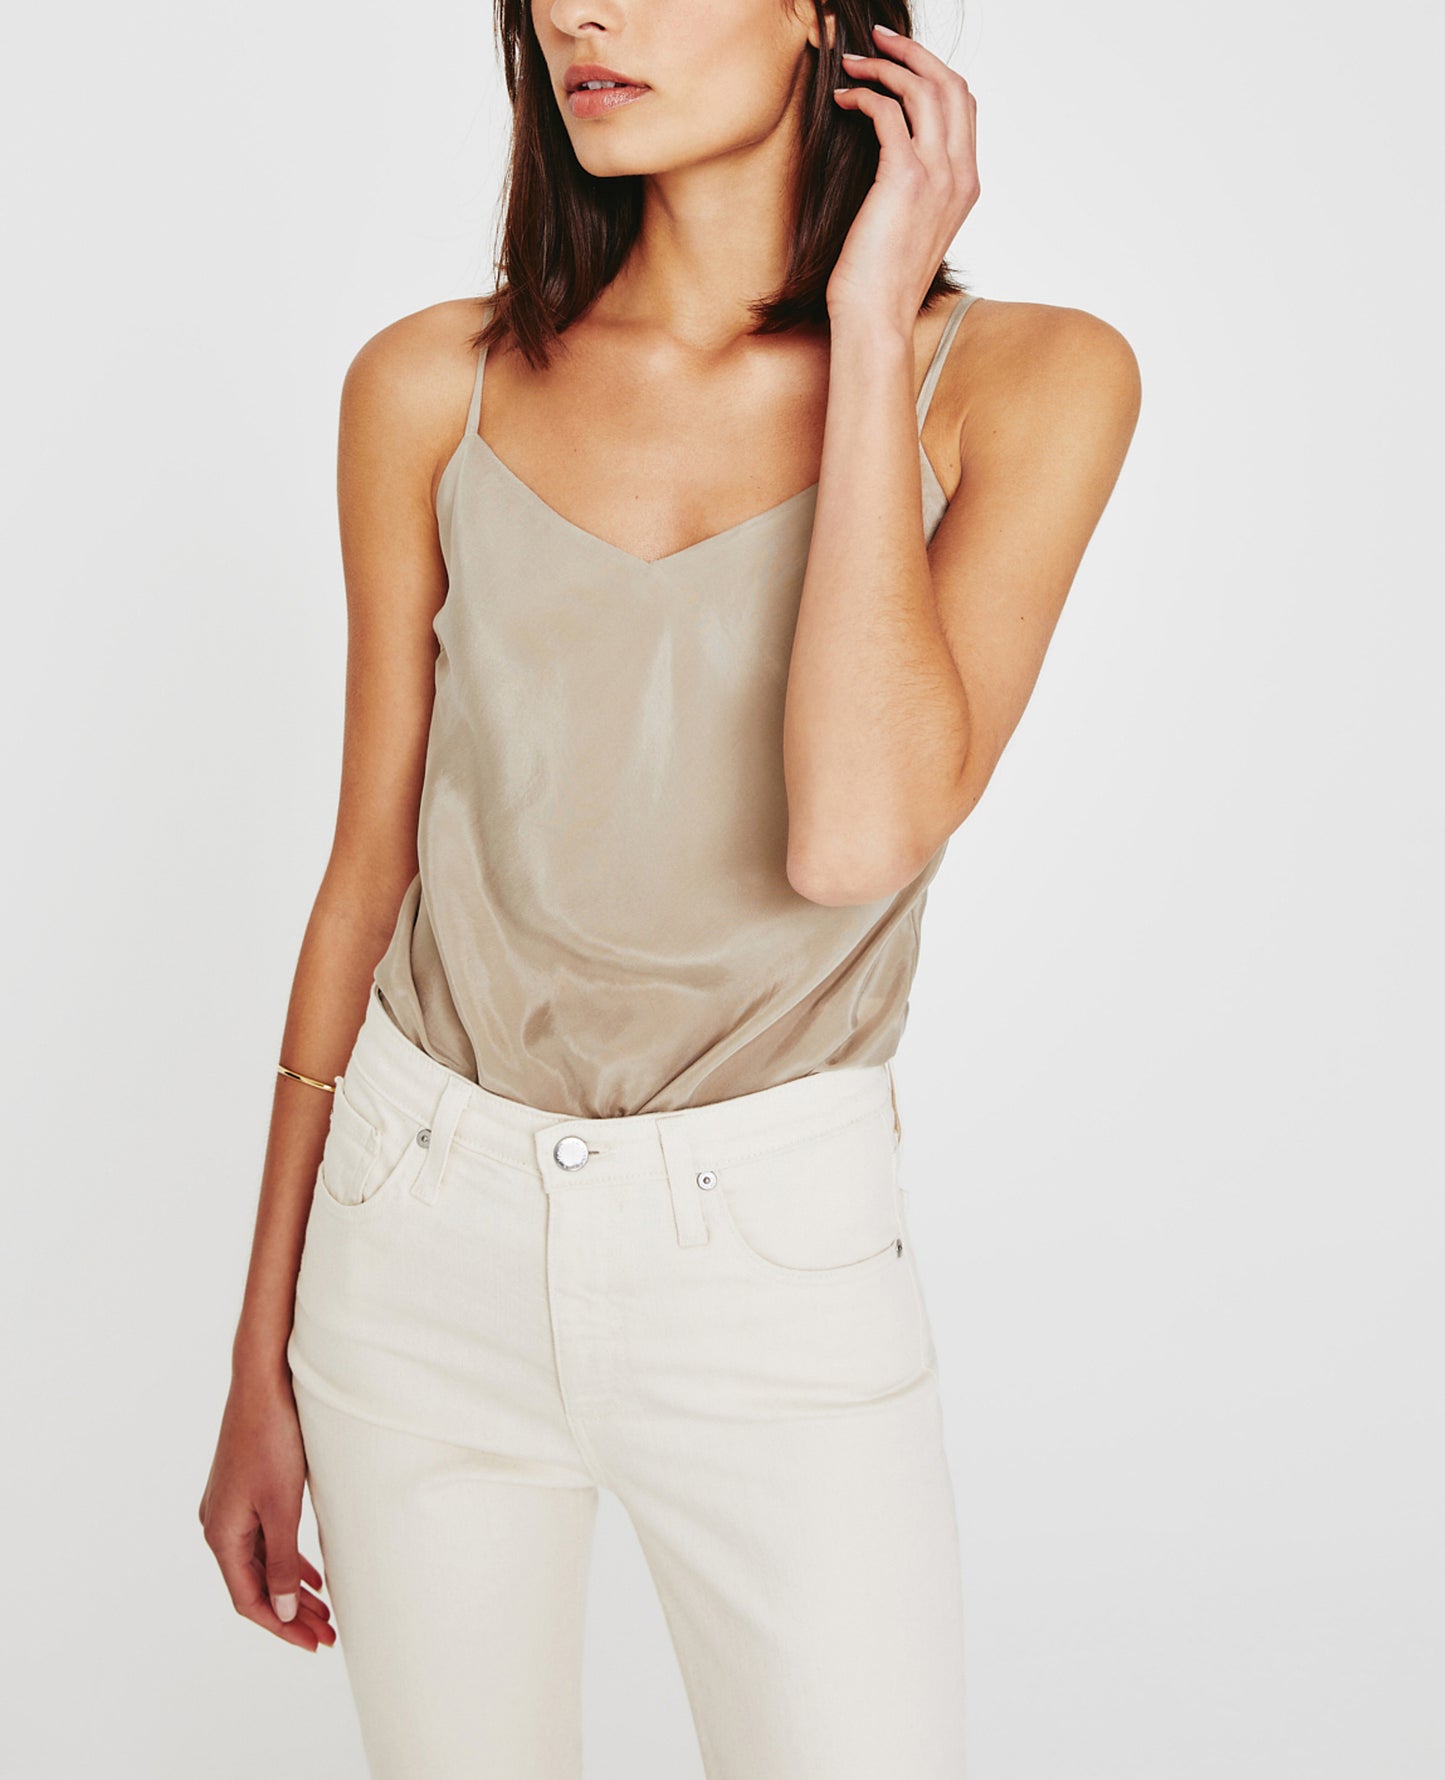 Scarlet Cami Wild Taupe Classic Camisole Women Tops Photo 1